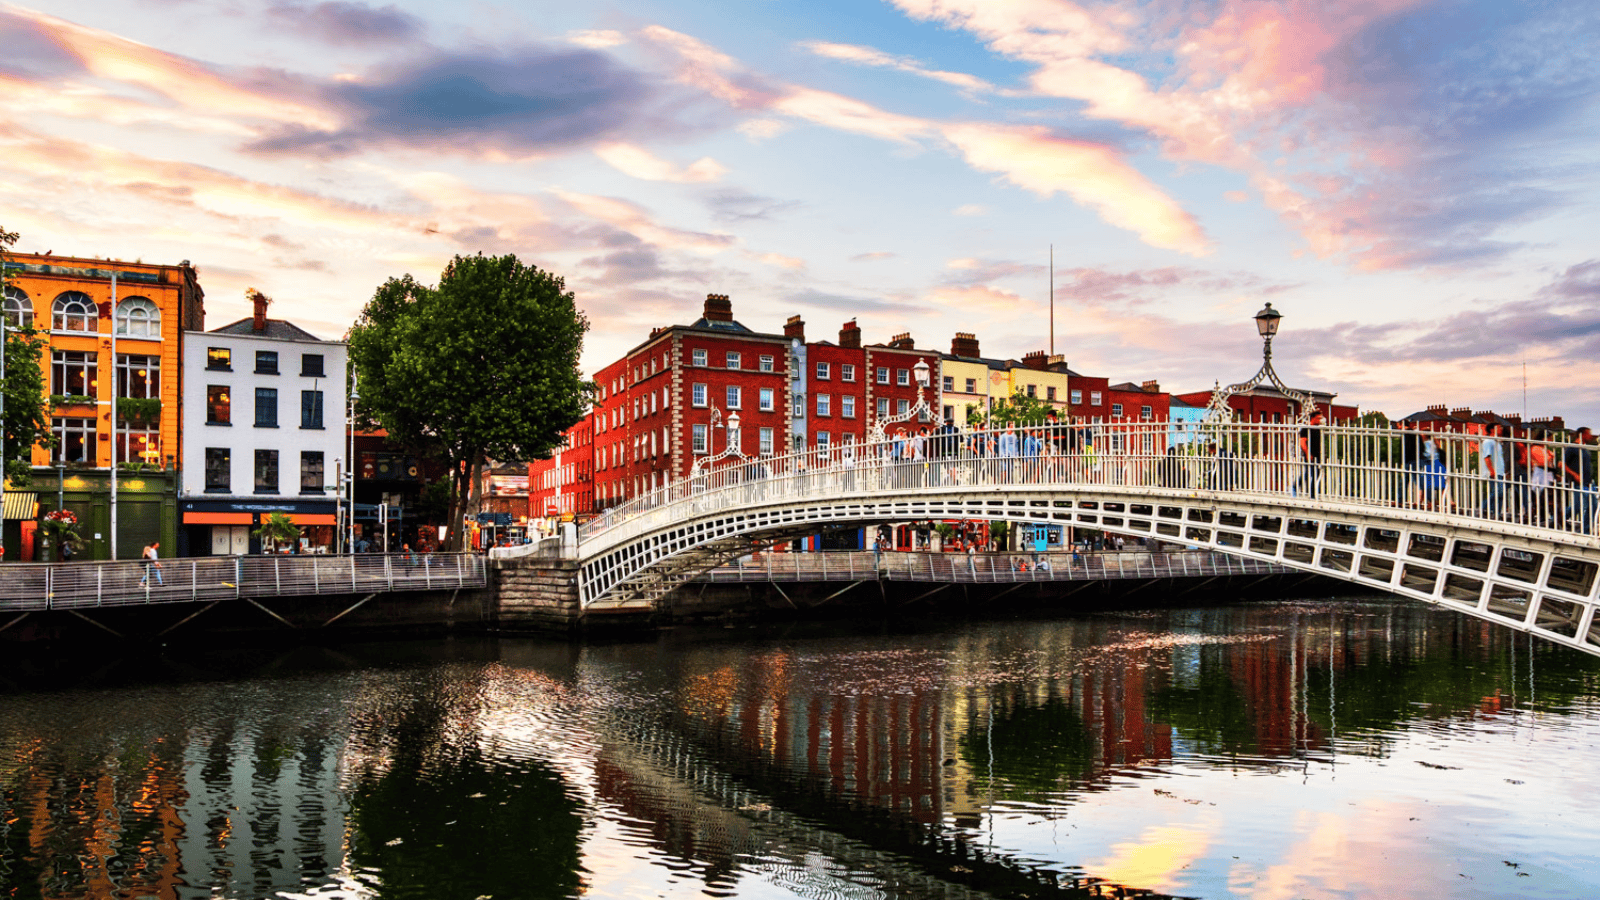 <p>Dublin is incredibly accessible, making it an excellent place for wheelchair users to vacation. Though you’ll have to navigate some cobblestone streets and hills, most attractions cater to disabilities.</p><p>There are wheelchair and scooter-friendly <a href="https://whatthefab.com/top-things-to-do-in-dublin.html" rel="follow">Dublin things to do</a>, such as the National Gallery of Ireland and bustling O’Connell Street. For guidance throughout town, check out Accessible Journeys Tours, which provides memorable experiences for disabled travelers.</p>